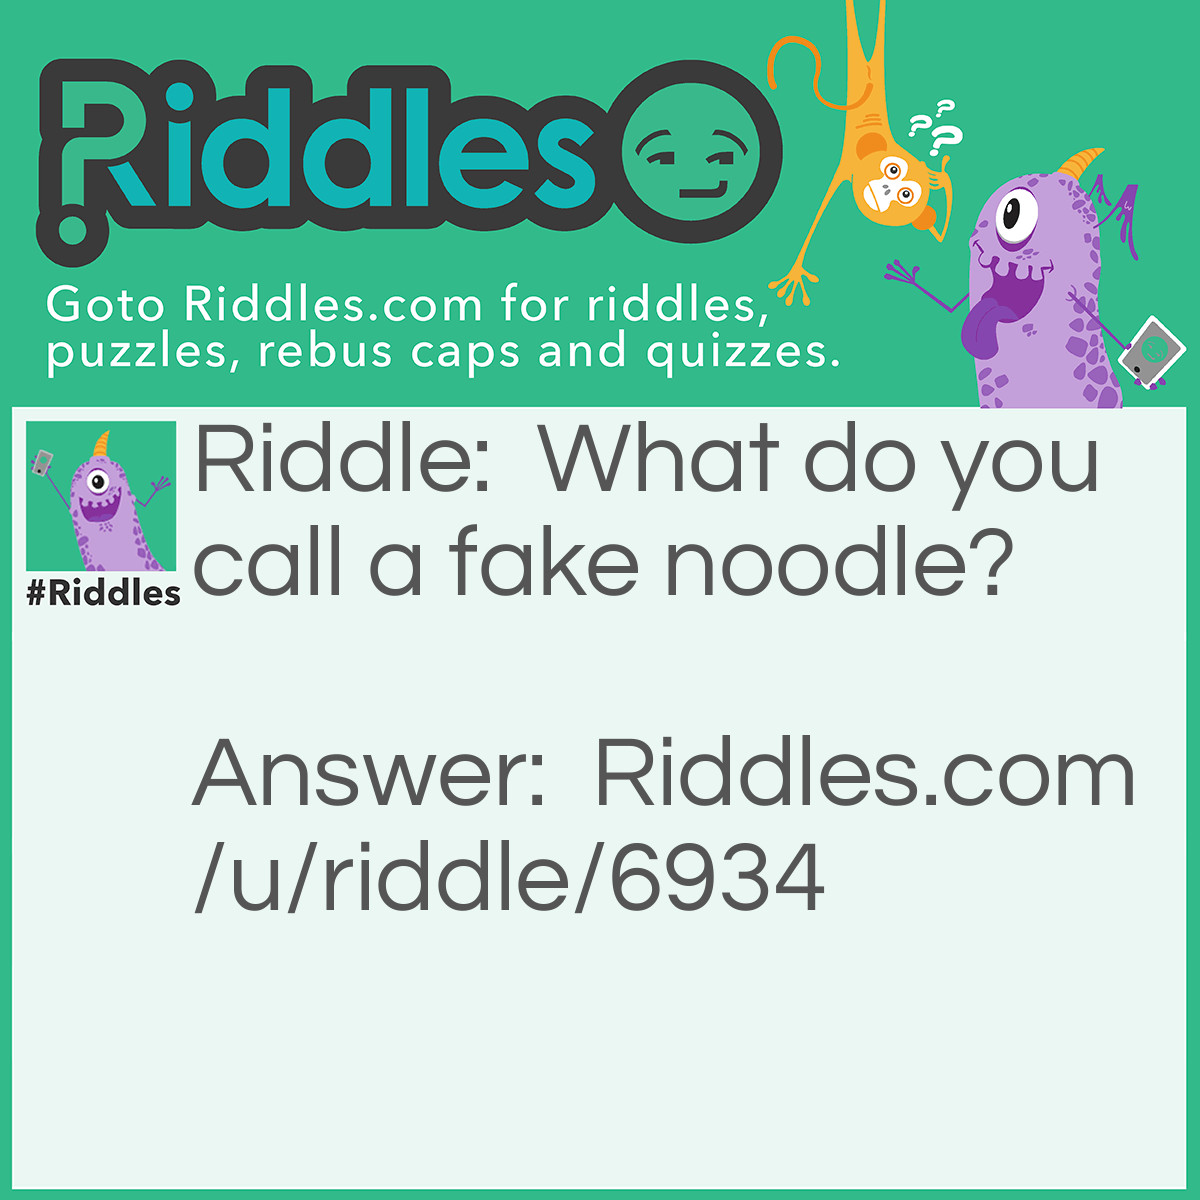 Riddle: What do you call a fake noodle? Answer: An impasta (impostor).